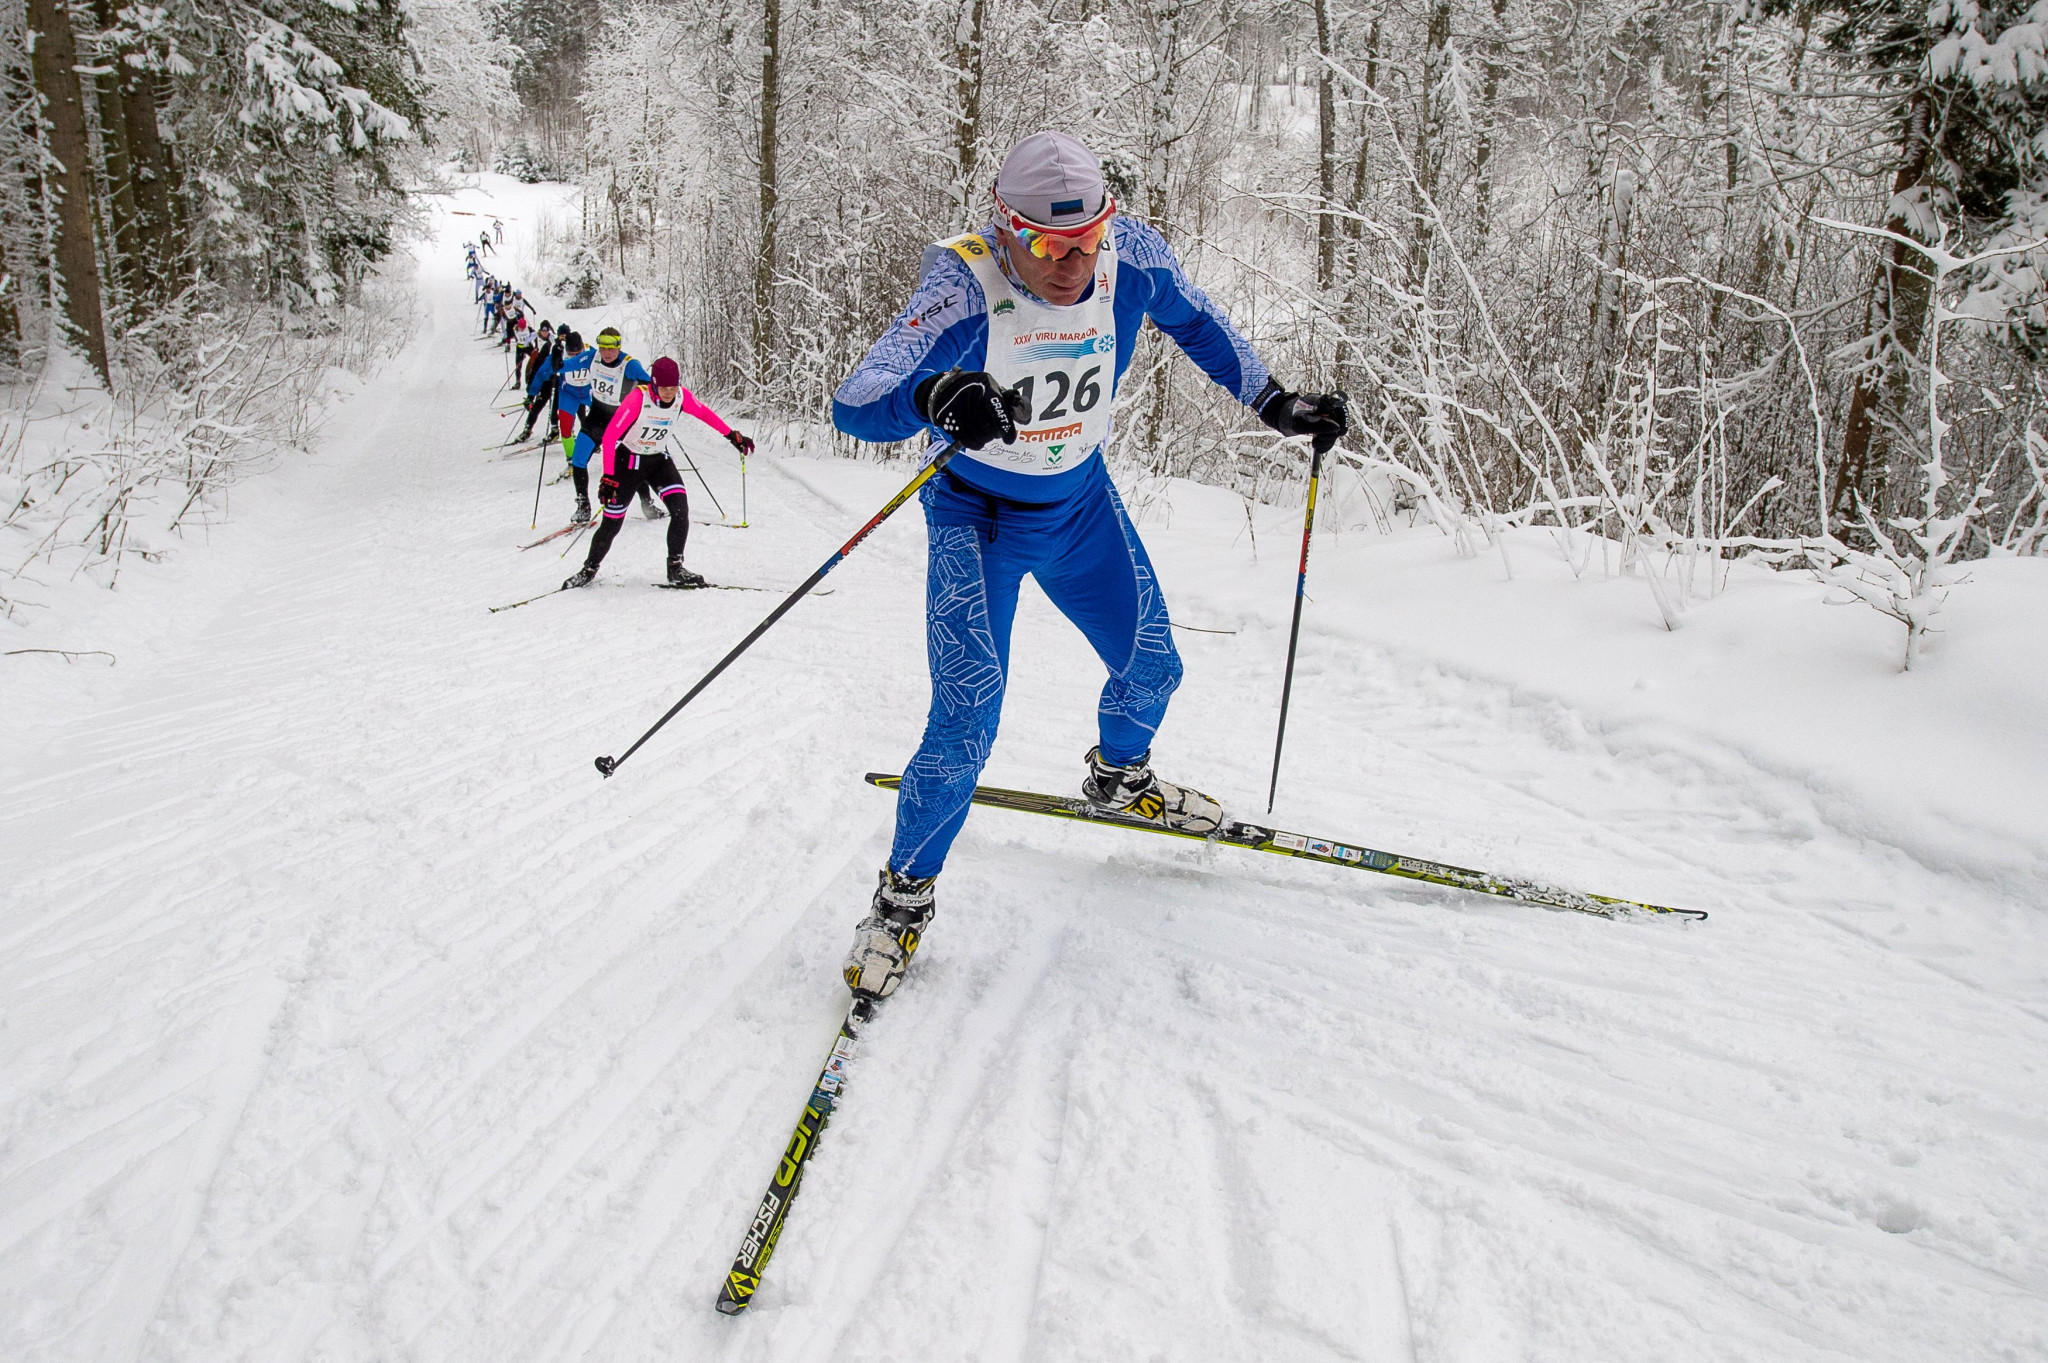 Russian and Belarusian athletes have been banned from Worldloppet competitions ©Getty Images